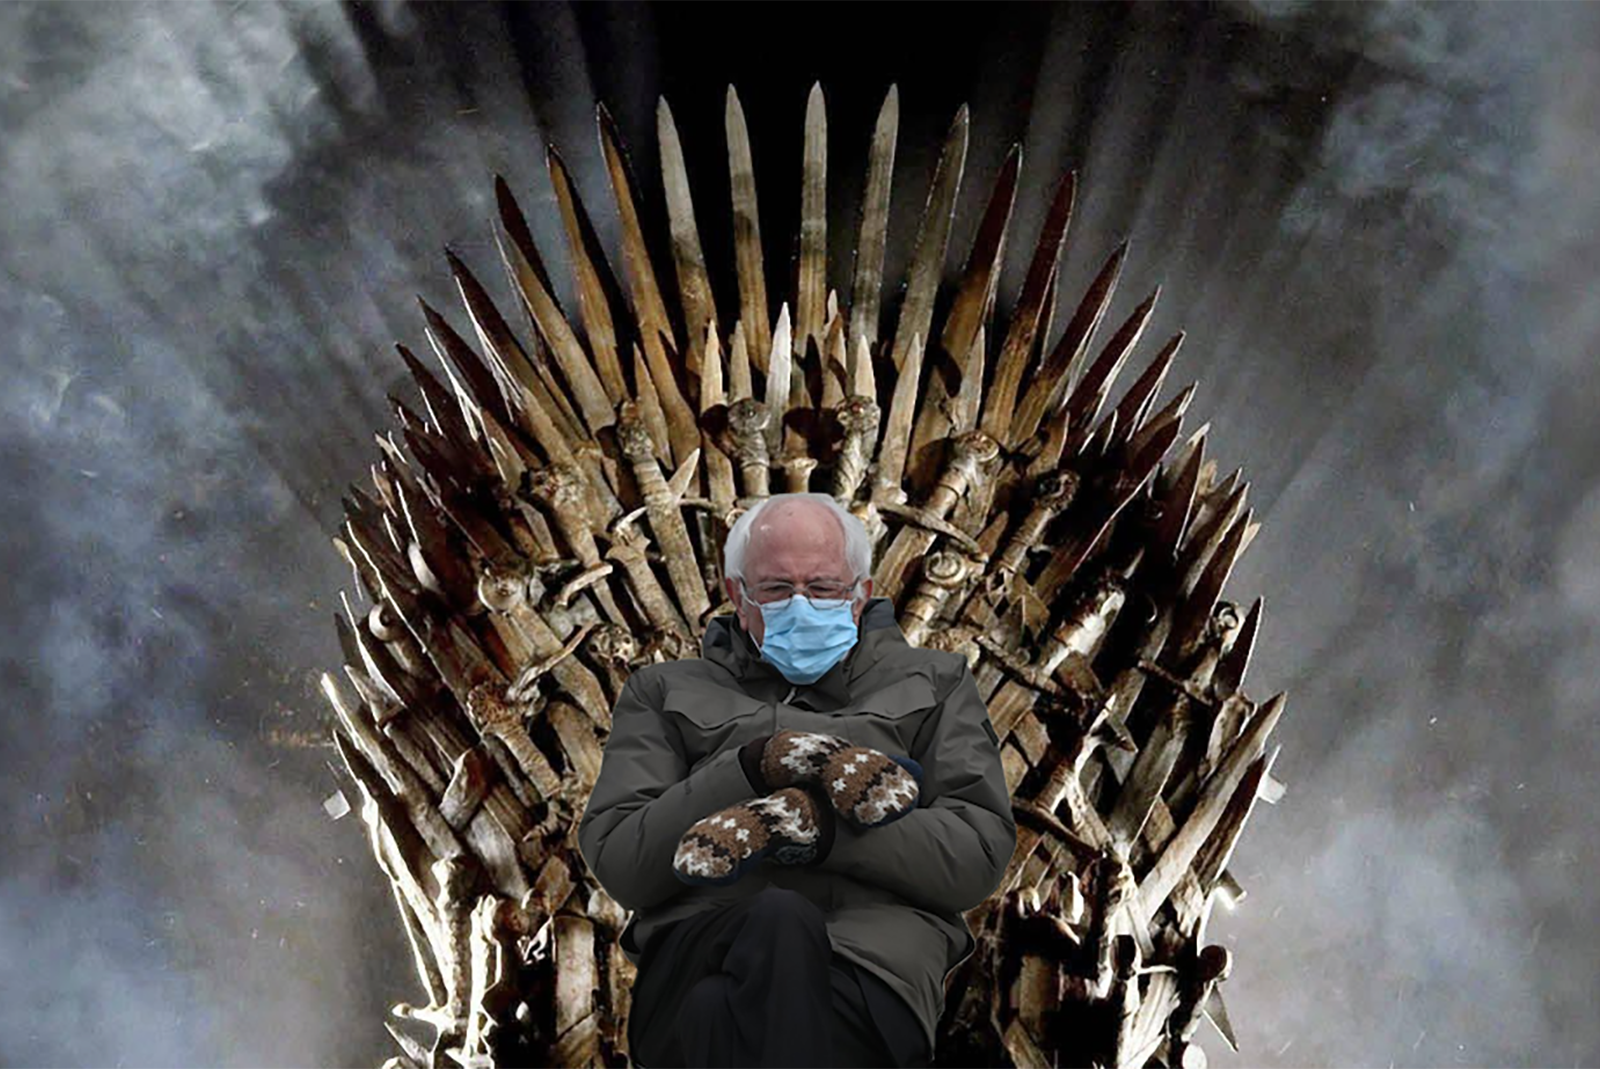 How to make a Bernie Sanders mittens meme with Snap, IG, or Street View photo 5